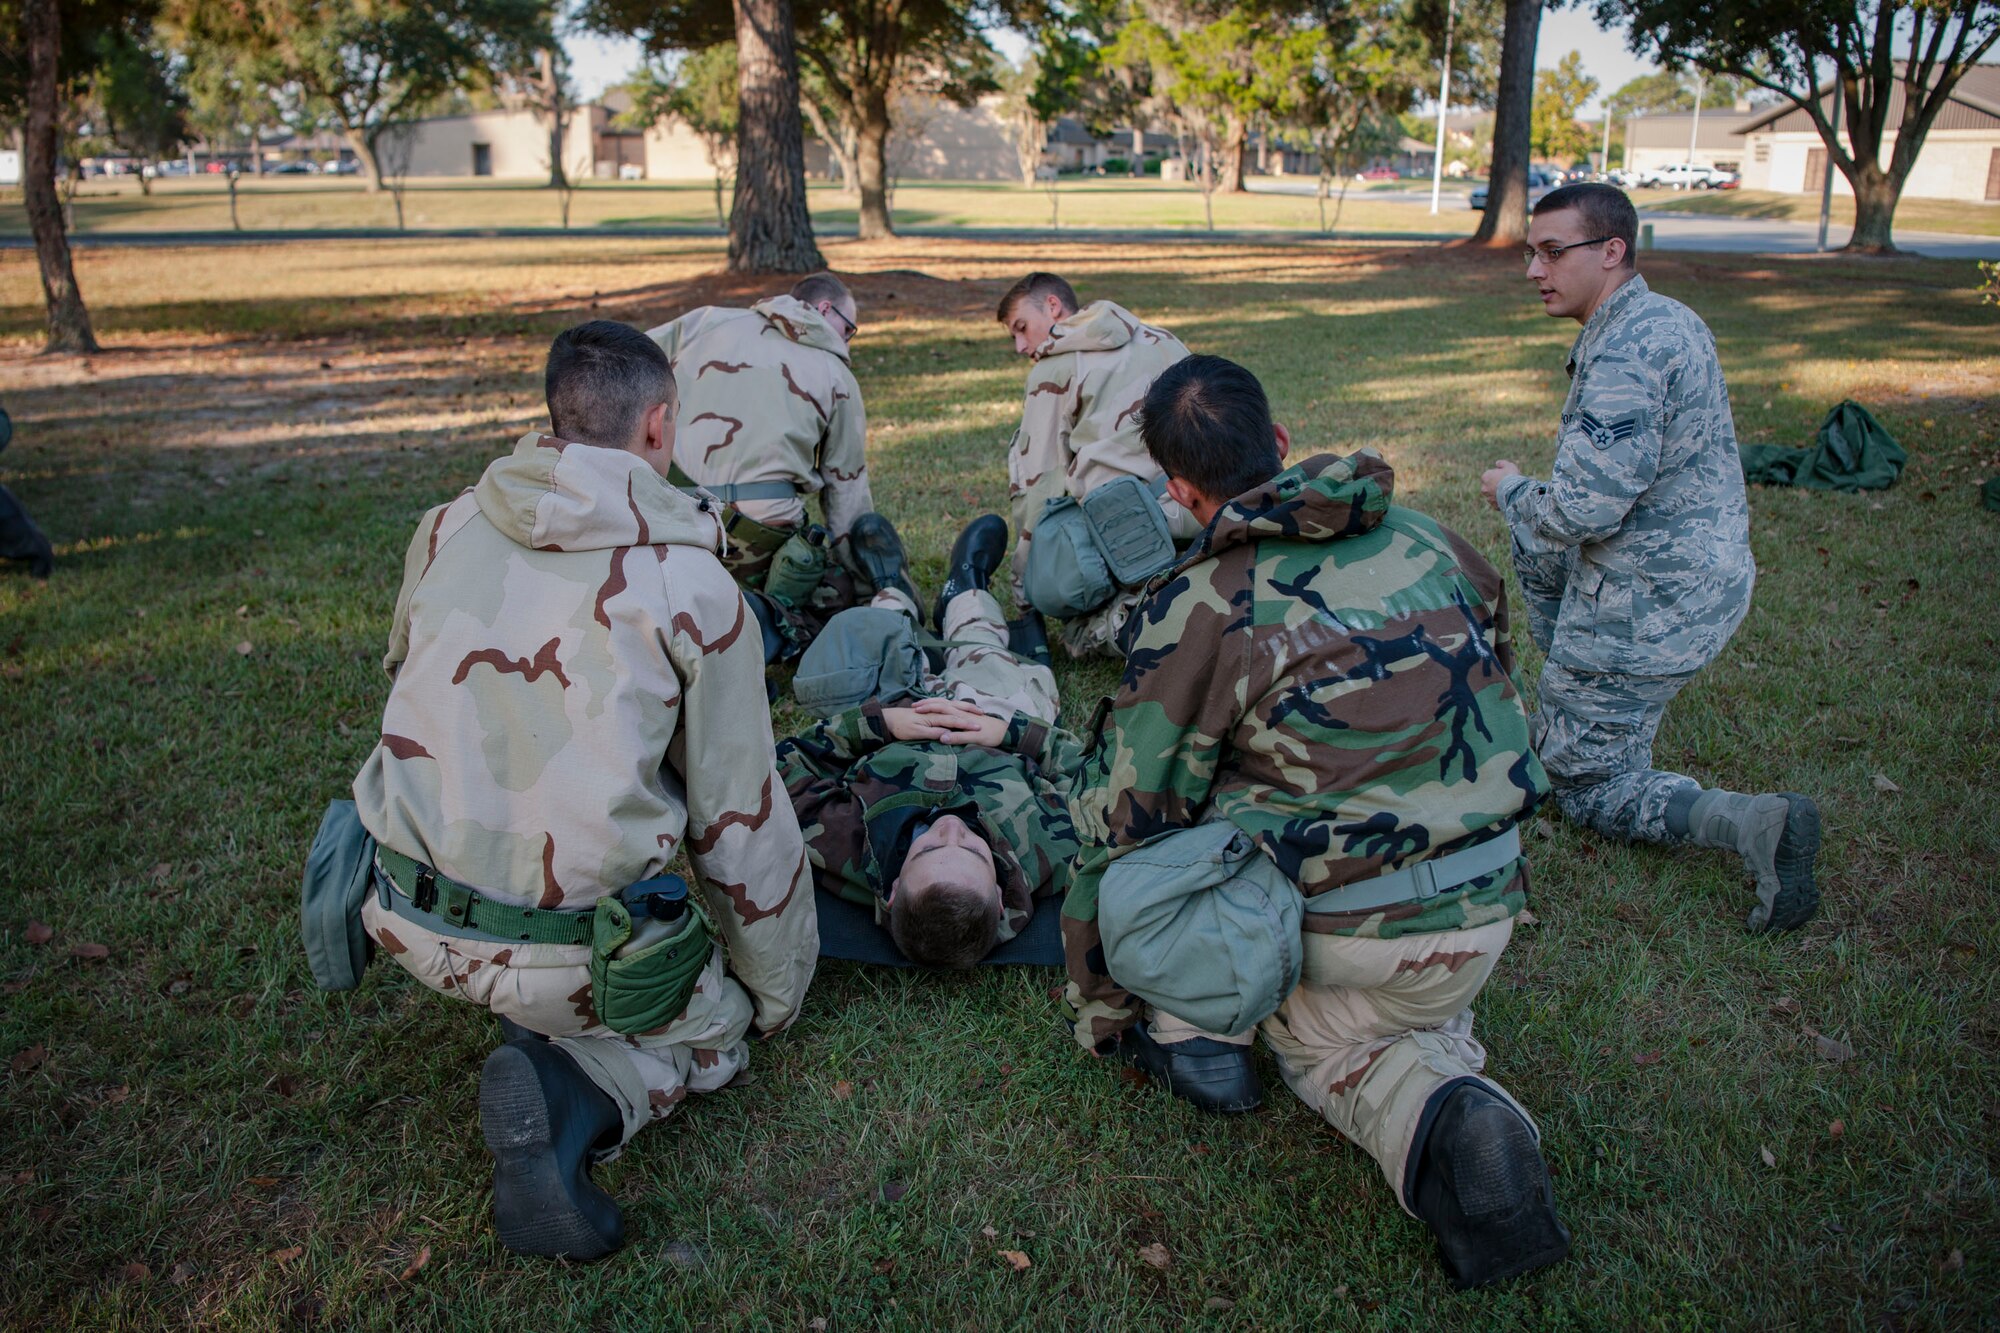 Senior Airman Derek Ketner, far right, 23d Medical Support Squadron medical lab technician, teaches self-aid and buddy care to Airmen from the 23d Civil Engineer Squadron during the Ability to Survive and Operate (ATSO) Rodeo, Sept. 20, 2018, at Moody Air Force Base, Ga. Approximately 2,000 Airmen executed self-aid and buddy care, security and chemical attack avoidance missions under duress in a simulated chemical warfare environment. Testing and enhancing their operational readiness, this prepared the 23d Wing for the upcoming Phase II exercise during Nov. 5-8, 2018, which will be conducted for the first time in seven years. (U.S. Air Force photo by Airman Taryn Butler)